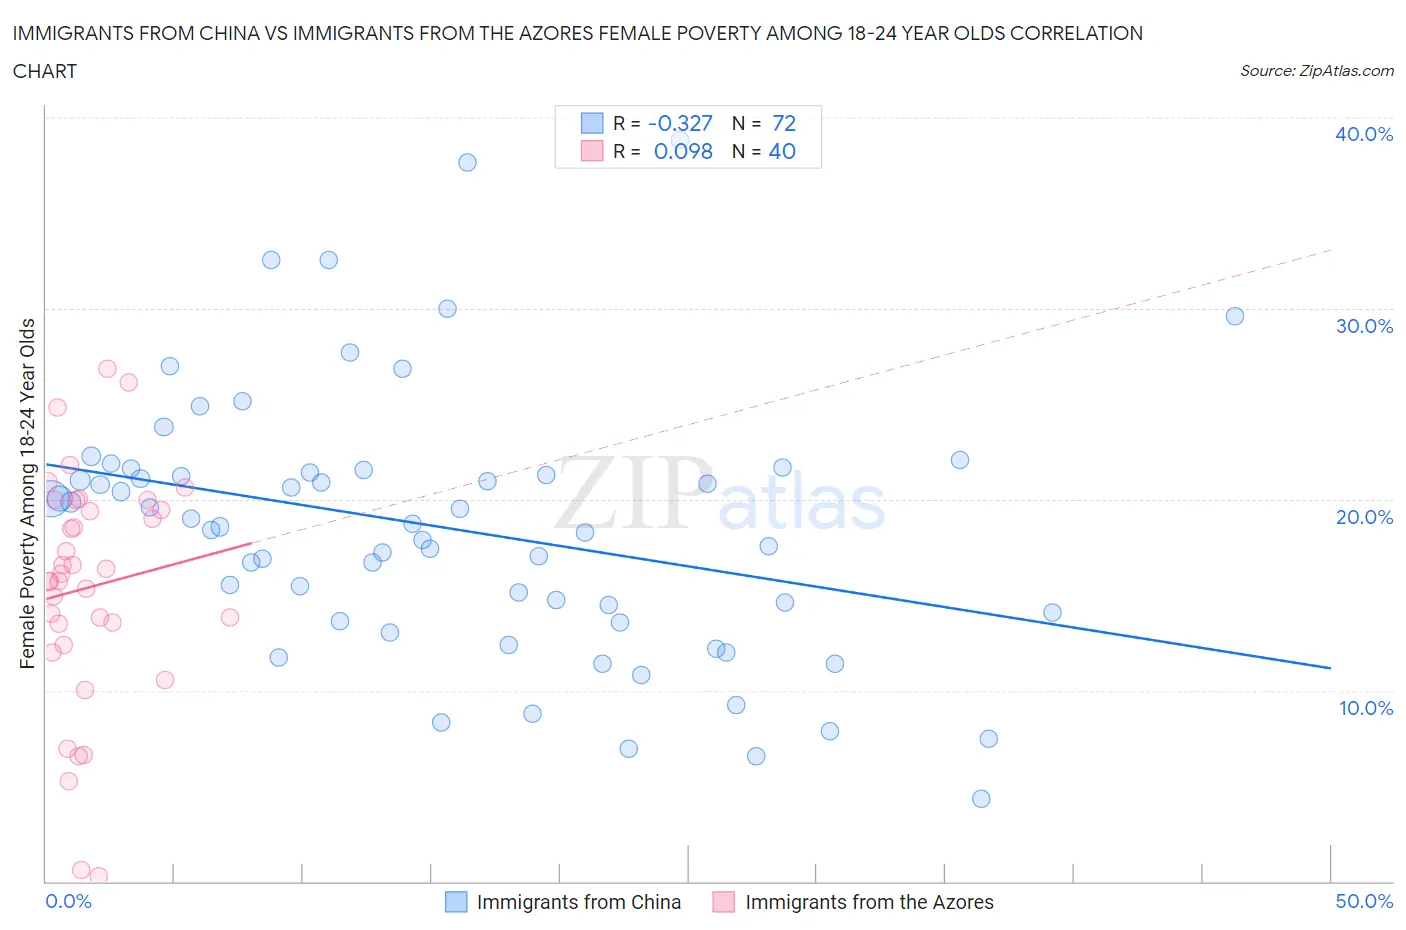 Immigrants from China vs Immigrants from the Azores Female Poverty Among 18-24 Year Olds